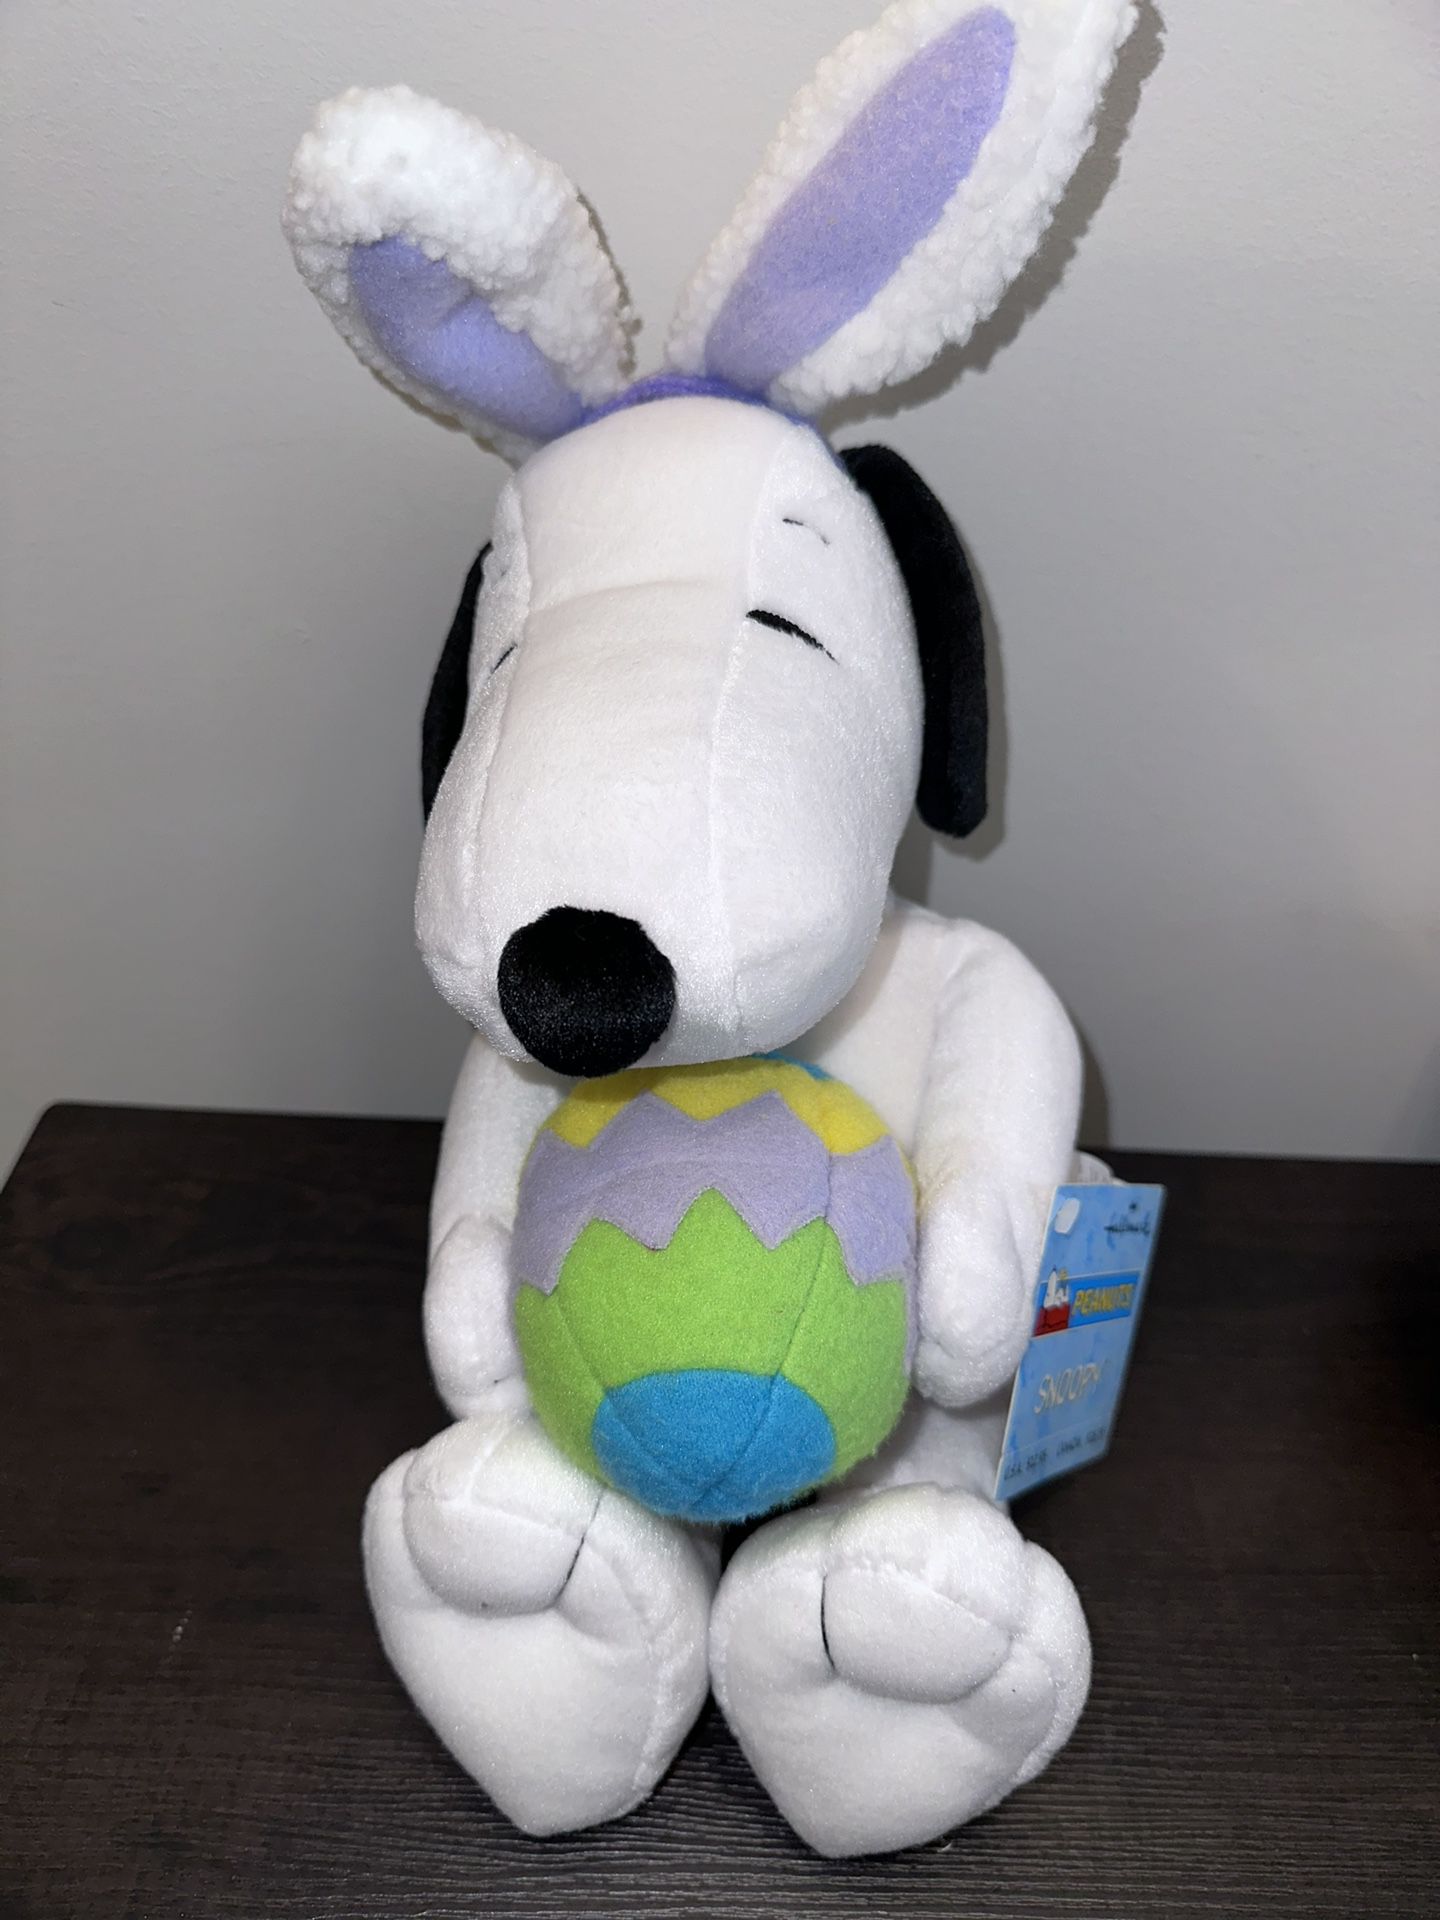 Vintage Hallmark Easter Bunny Snoopy Peanuts Plush with Easter Egg